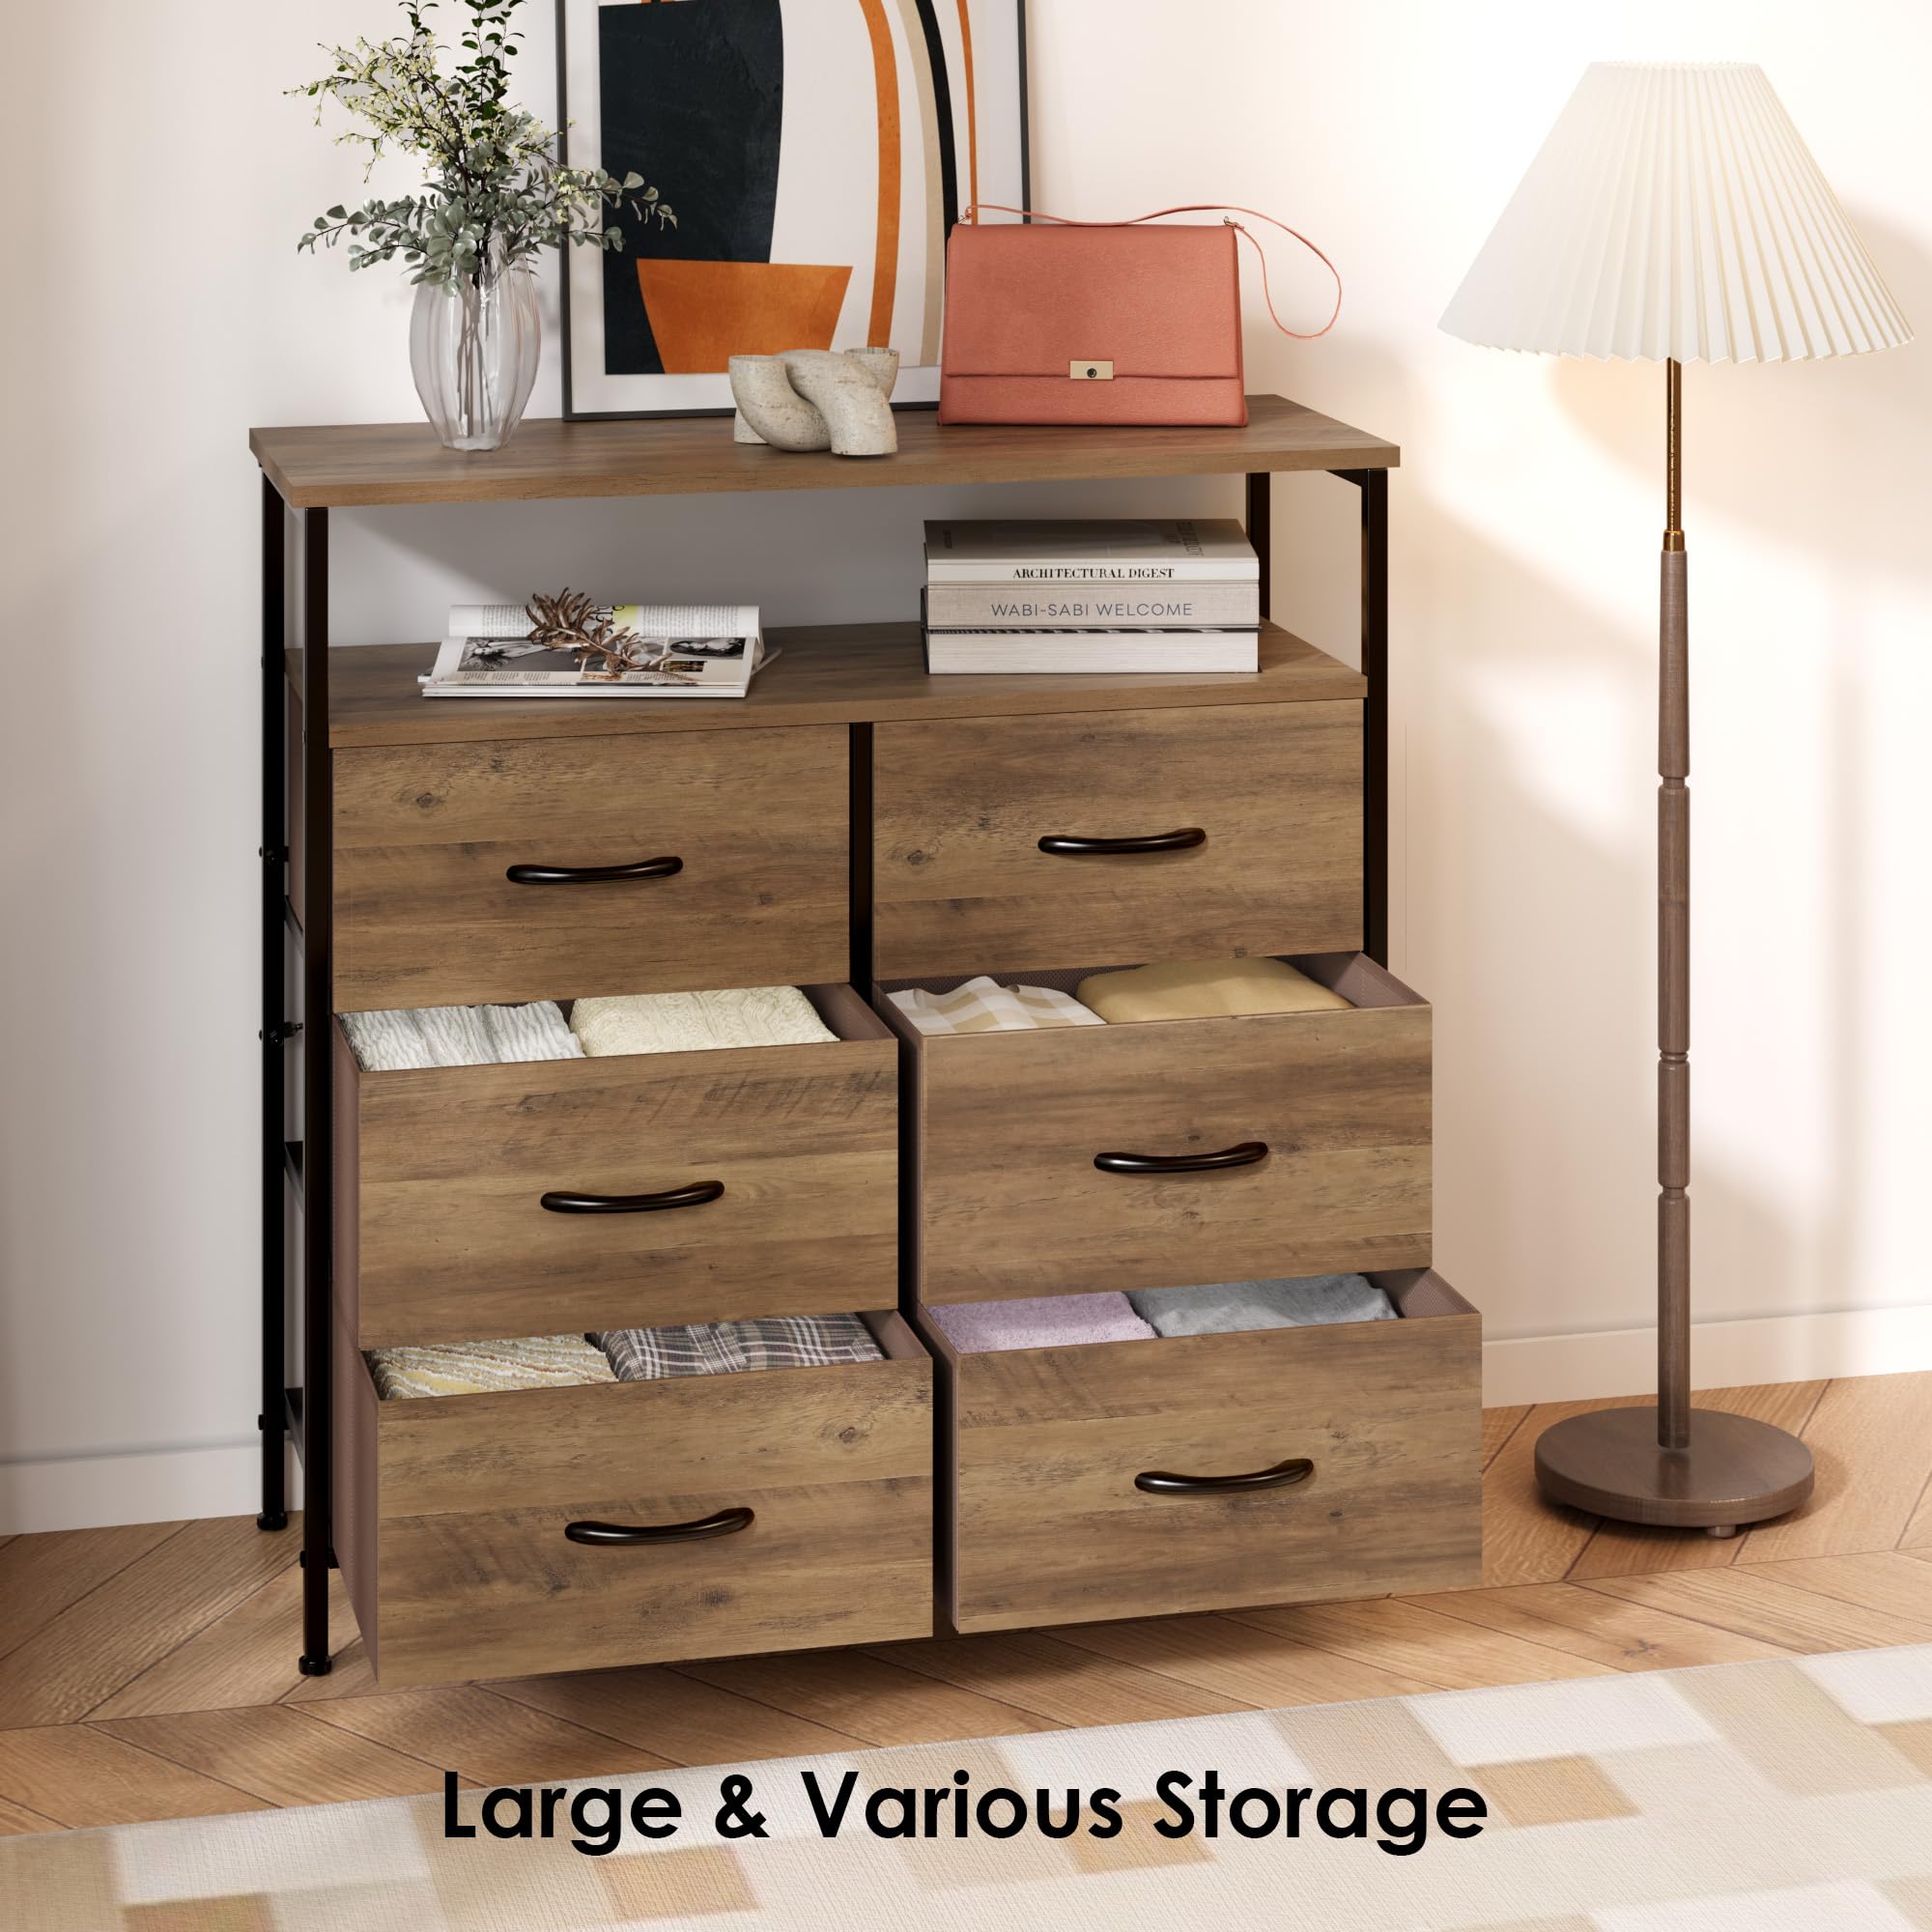 BOTLOG Dresser for Bedroom, 6 Drawer Dresser for Closet, Clothes, Kids, Chest of Drawers TV Stand with Storage Drawers, Wood Top, Fabric Drawers